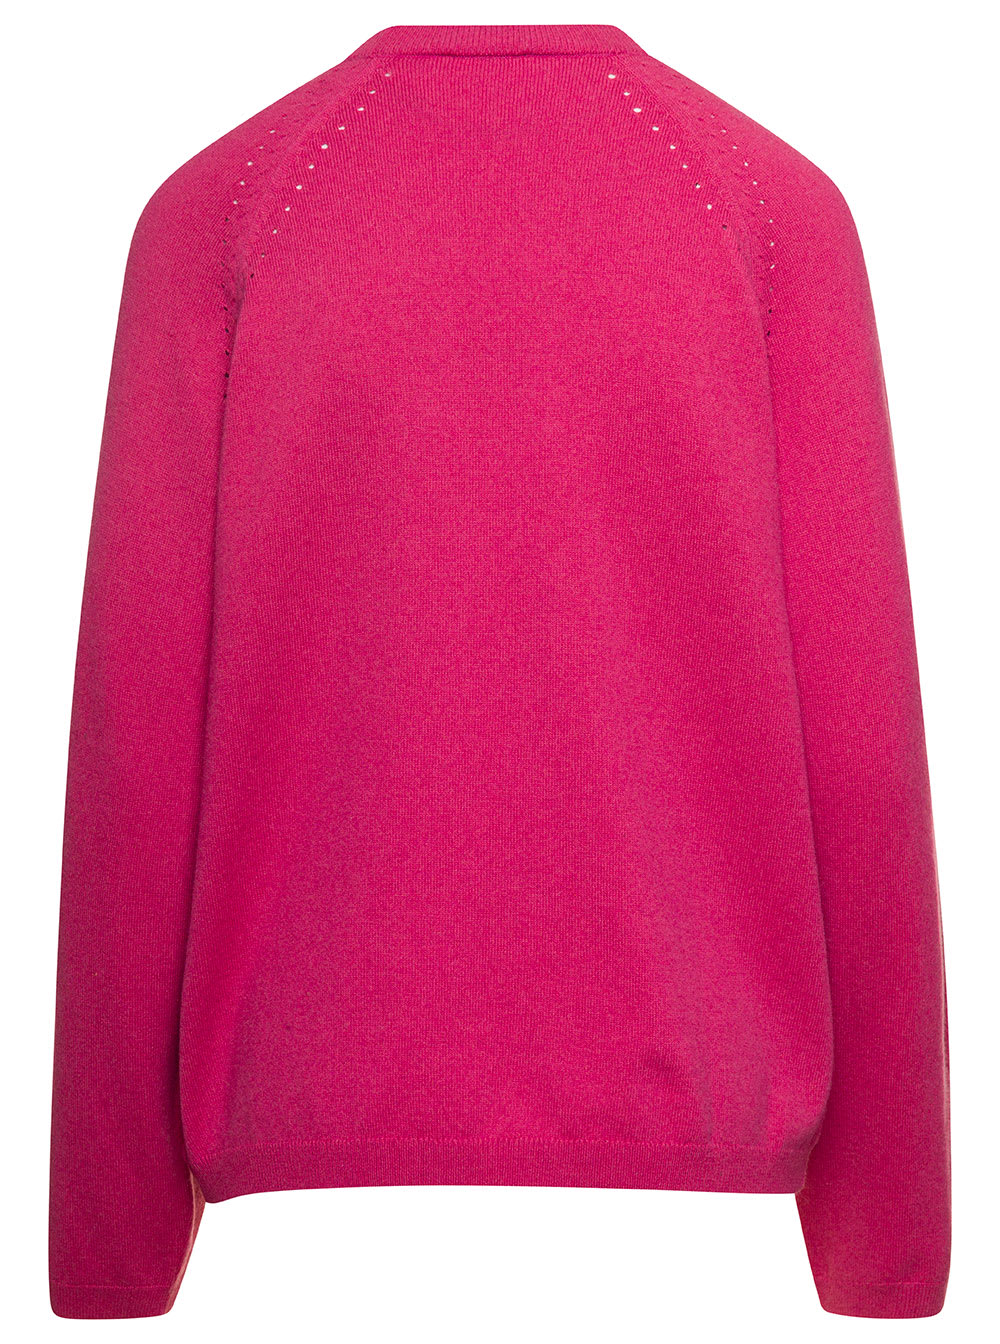 Shop Apc Rosanna Fuchsia Crewneck Sweater With Perforated Details In Cotton And Cashmere Woman In Fuxia